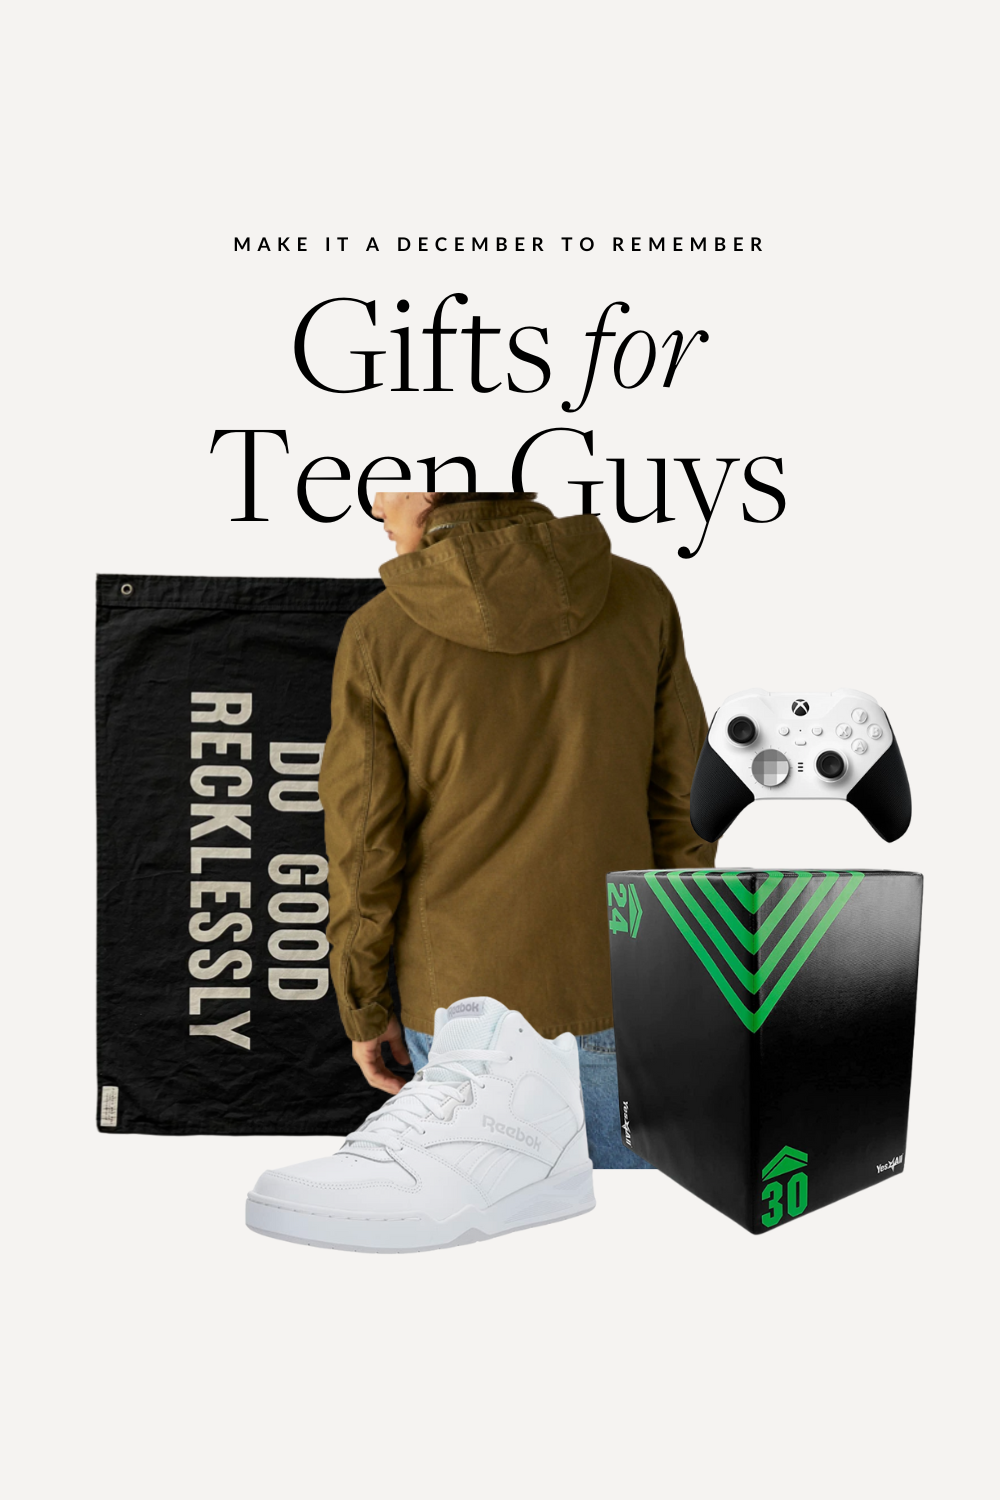 Holiday gift guide & stocking stuffer inspiration for the teen guys this holiday season! It's my 2022 gift guide for teens and I hope you find something you would love to gift this Christmas season! Be sure and catch the full Gift Guide Week over on KaraLayne.com!